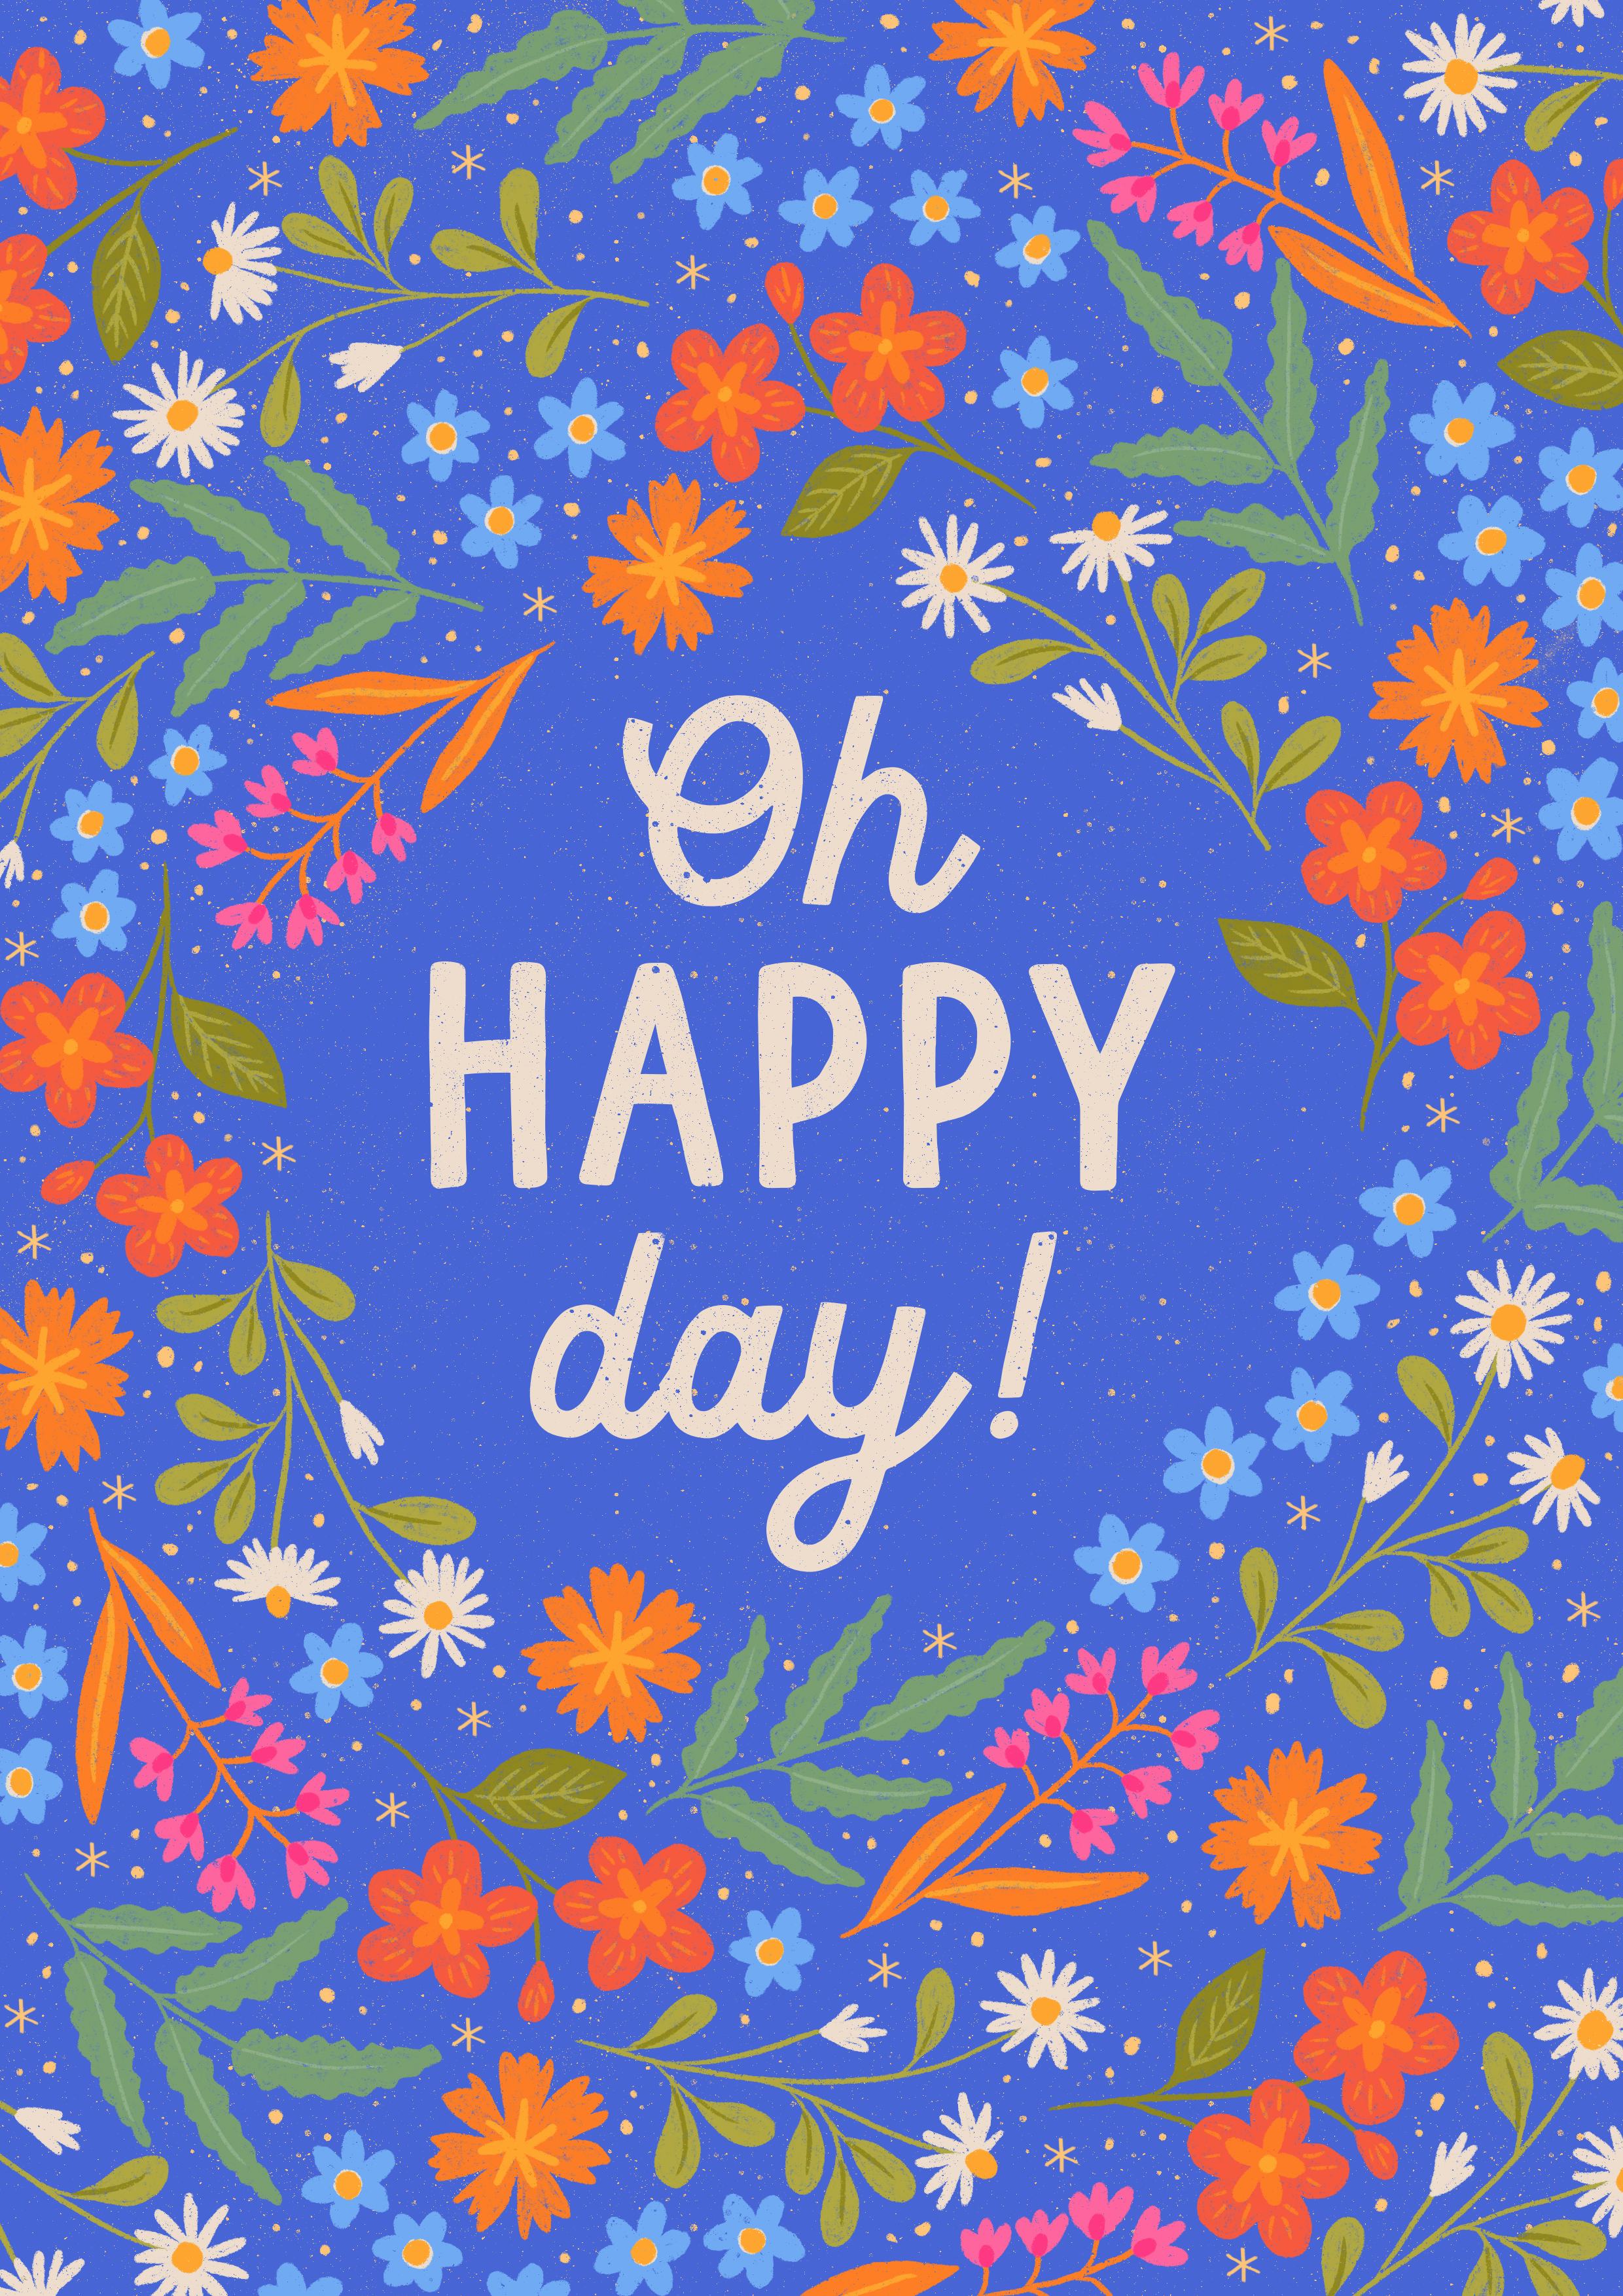 Colorful greeting card "Oh happy day!"